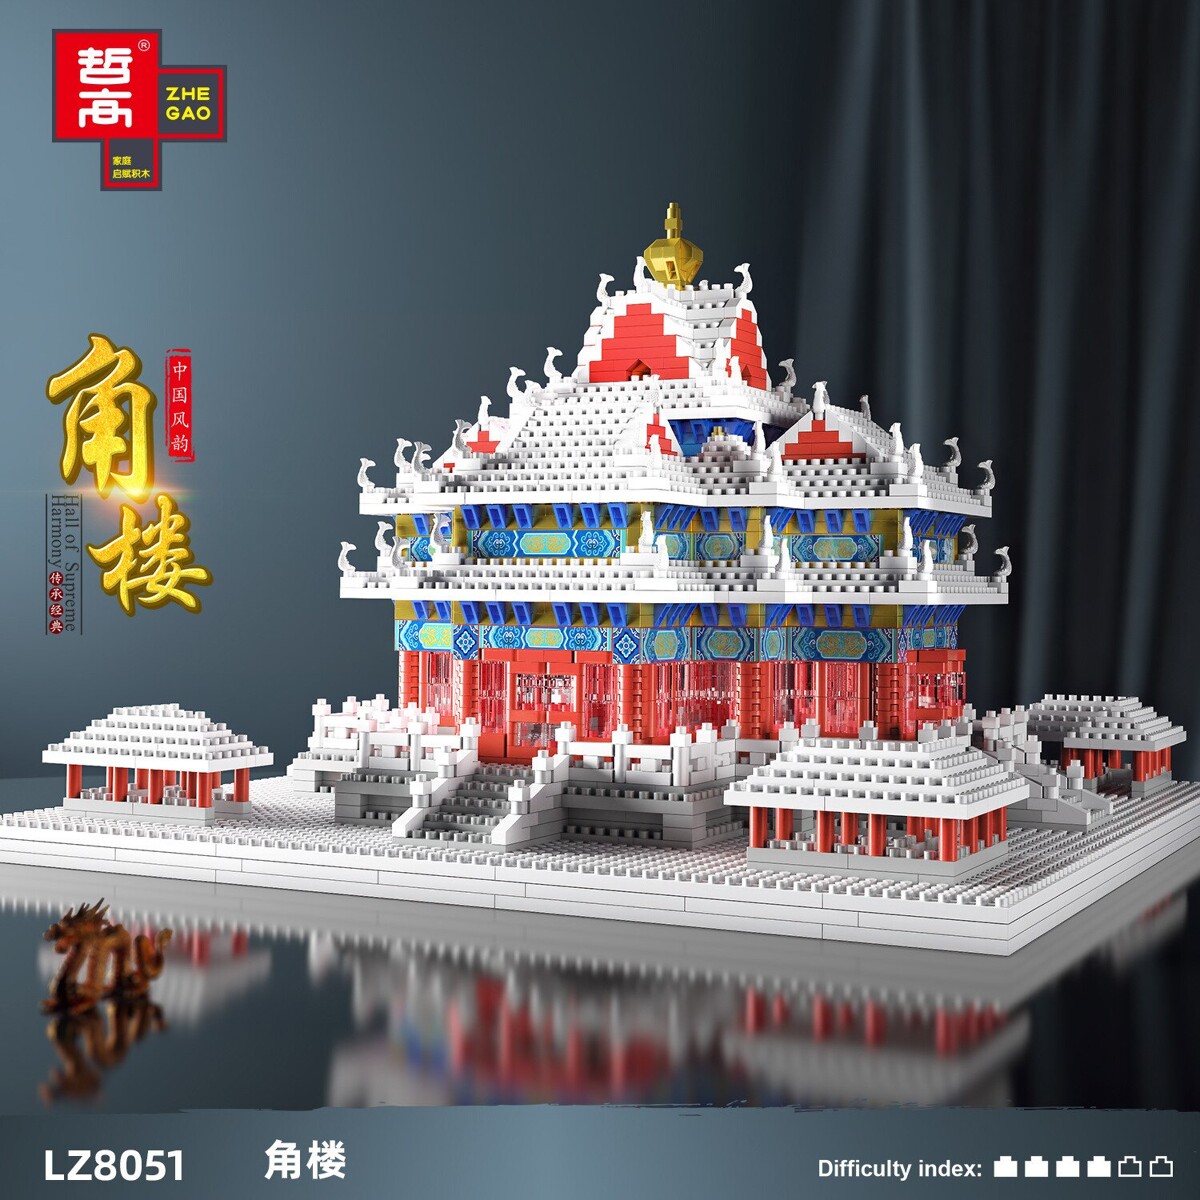 Zhe Gao LZ8051 Snow Imperial Palace Turret Tower